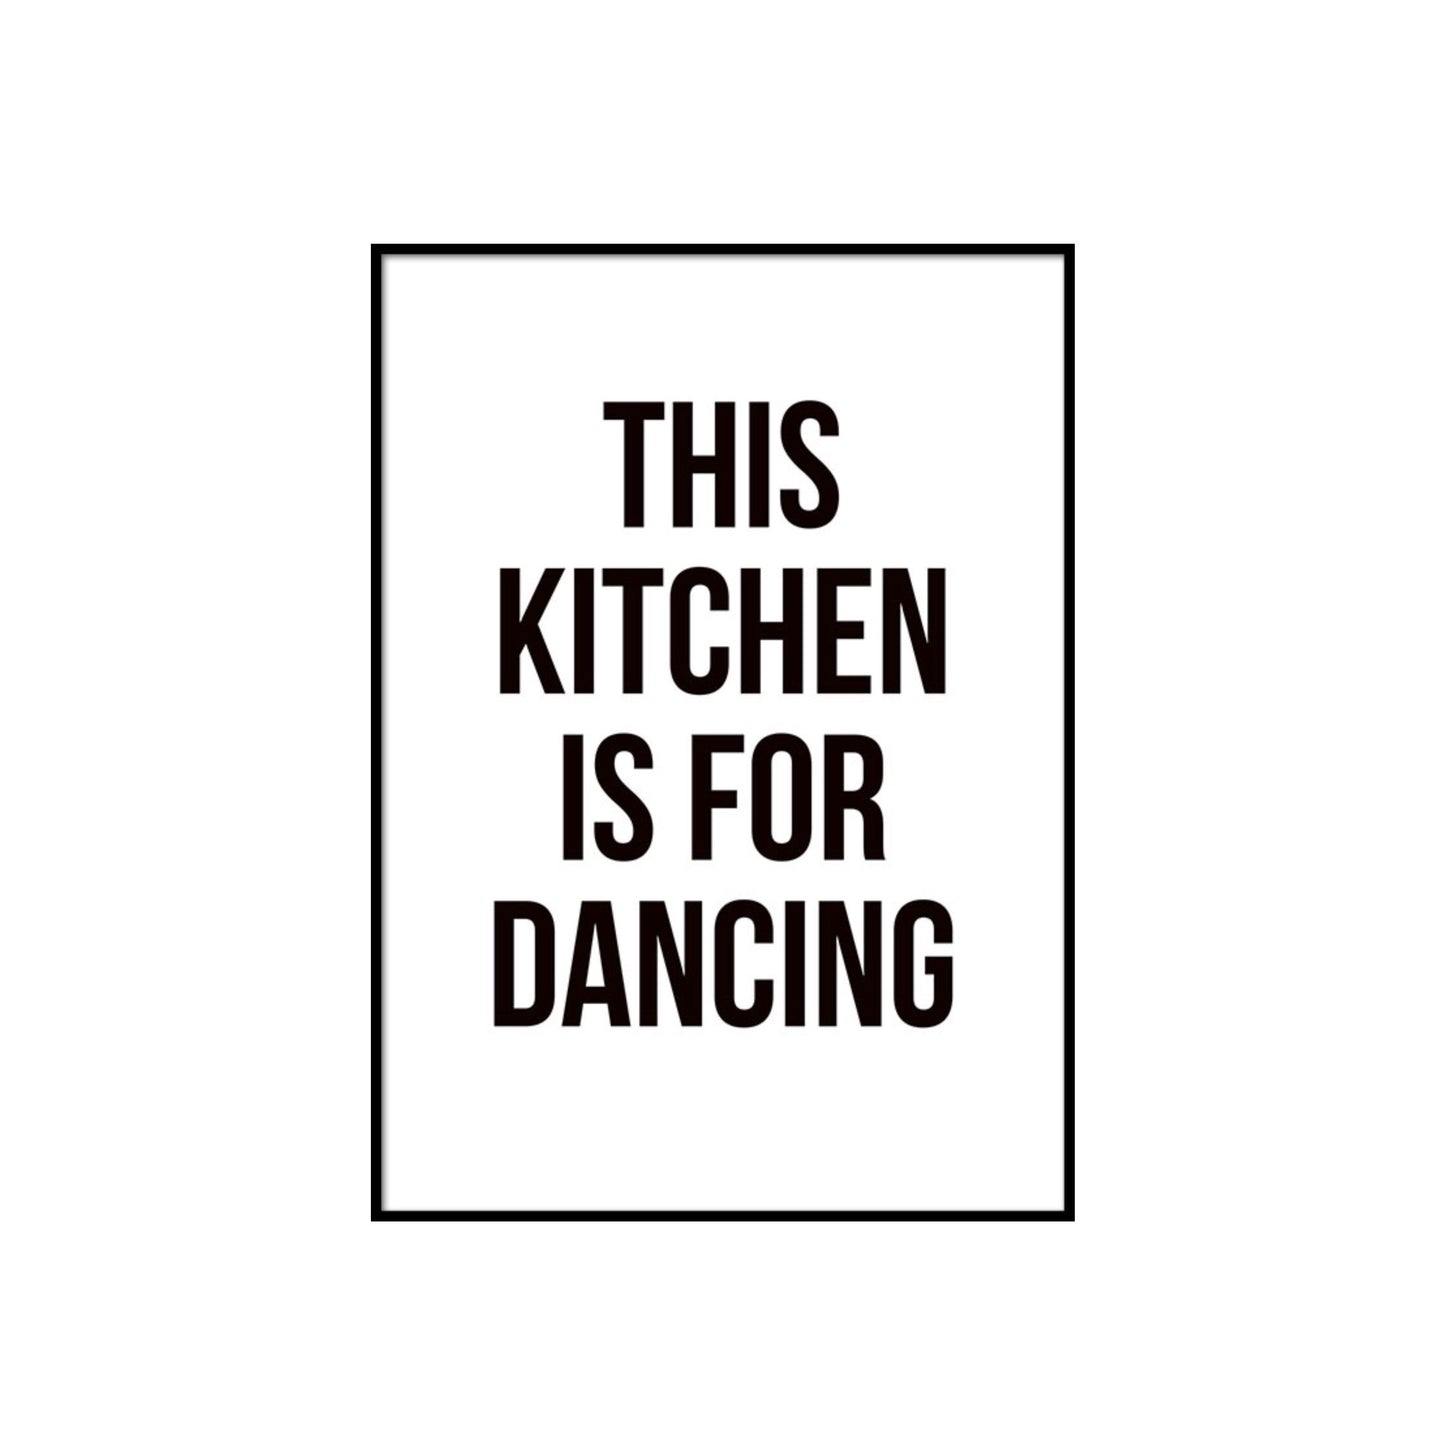 This kitchen is for dancing - THE WALL STYLIST